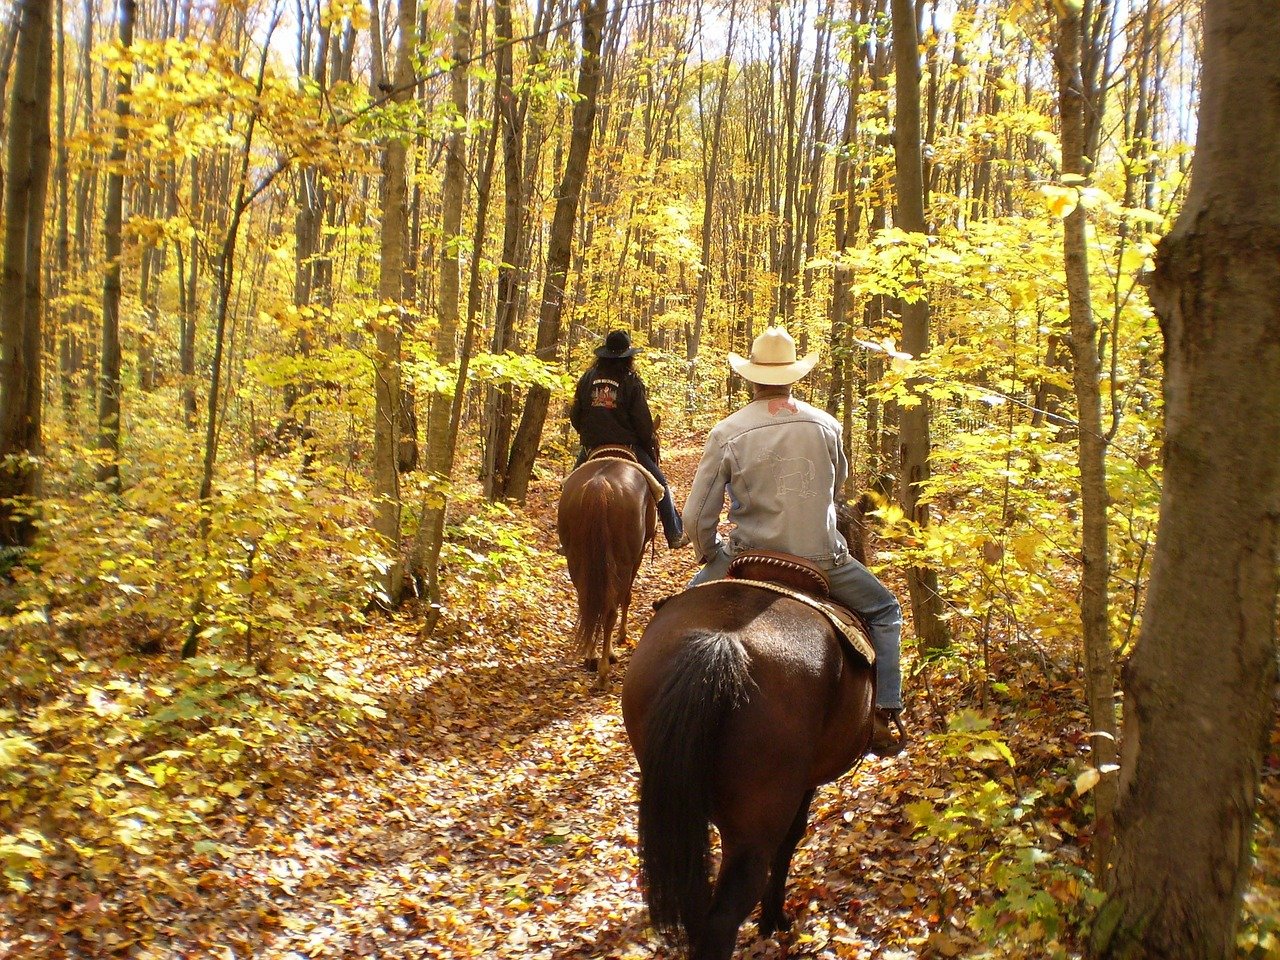 Trail riding is an excellent wait to build trust between horse and rider and change up a training routine